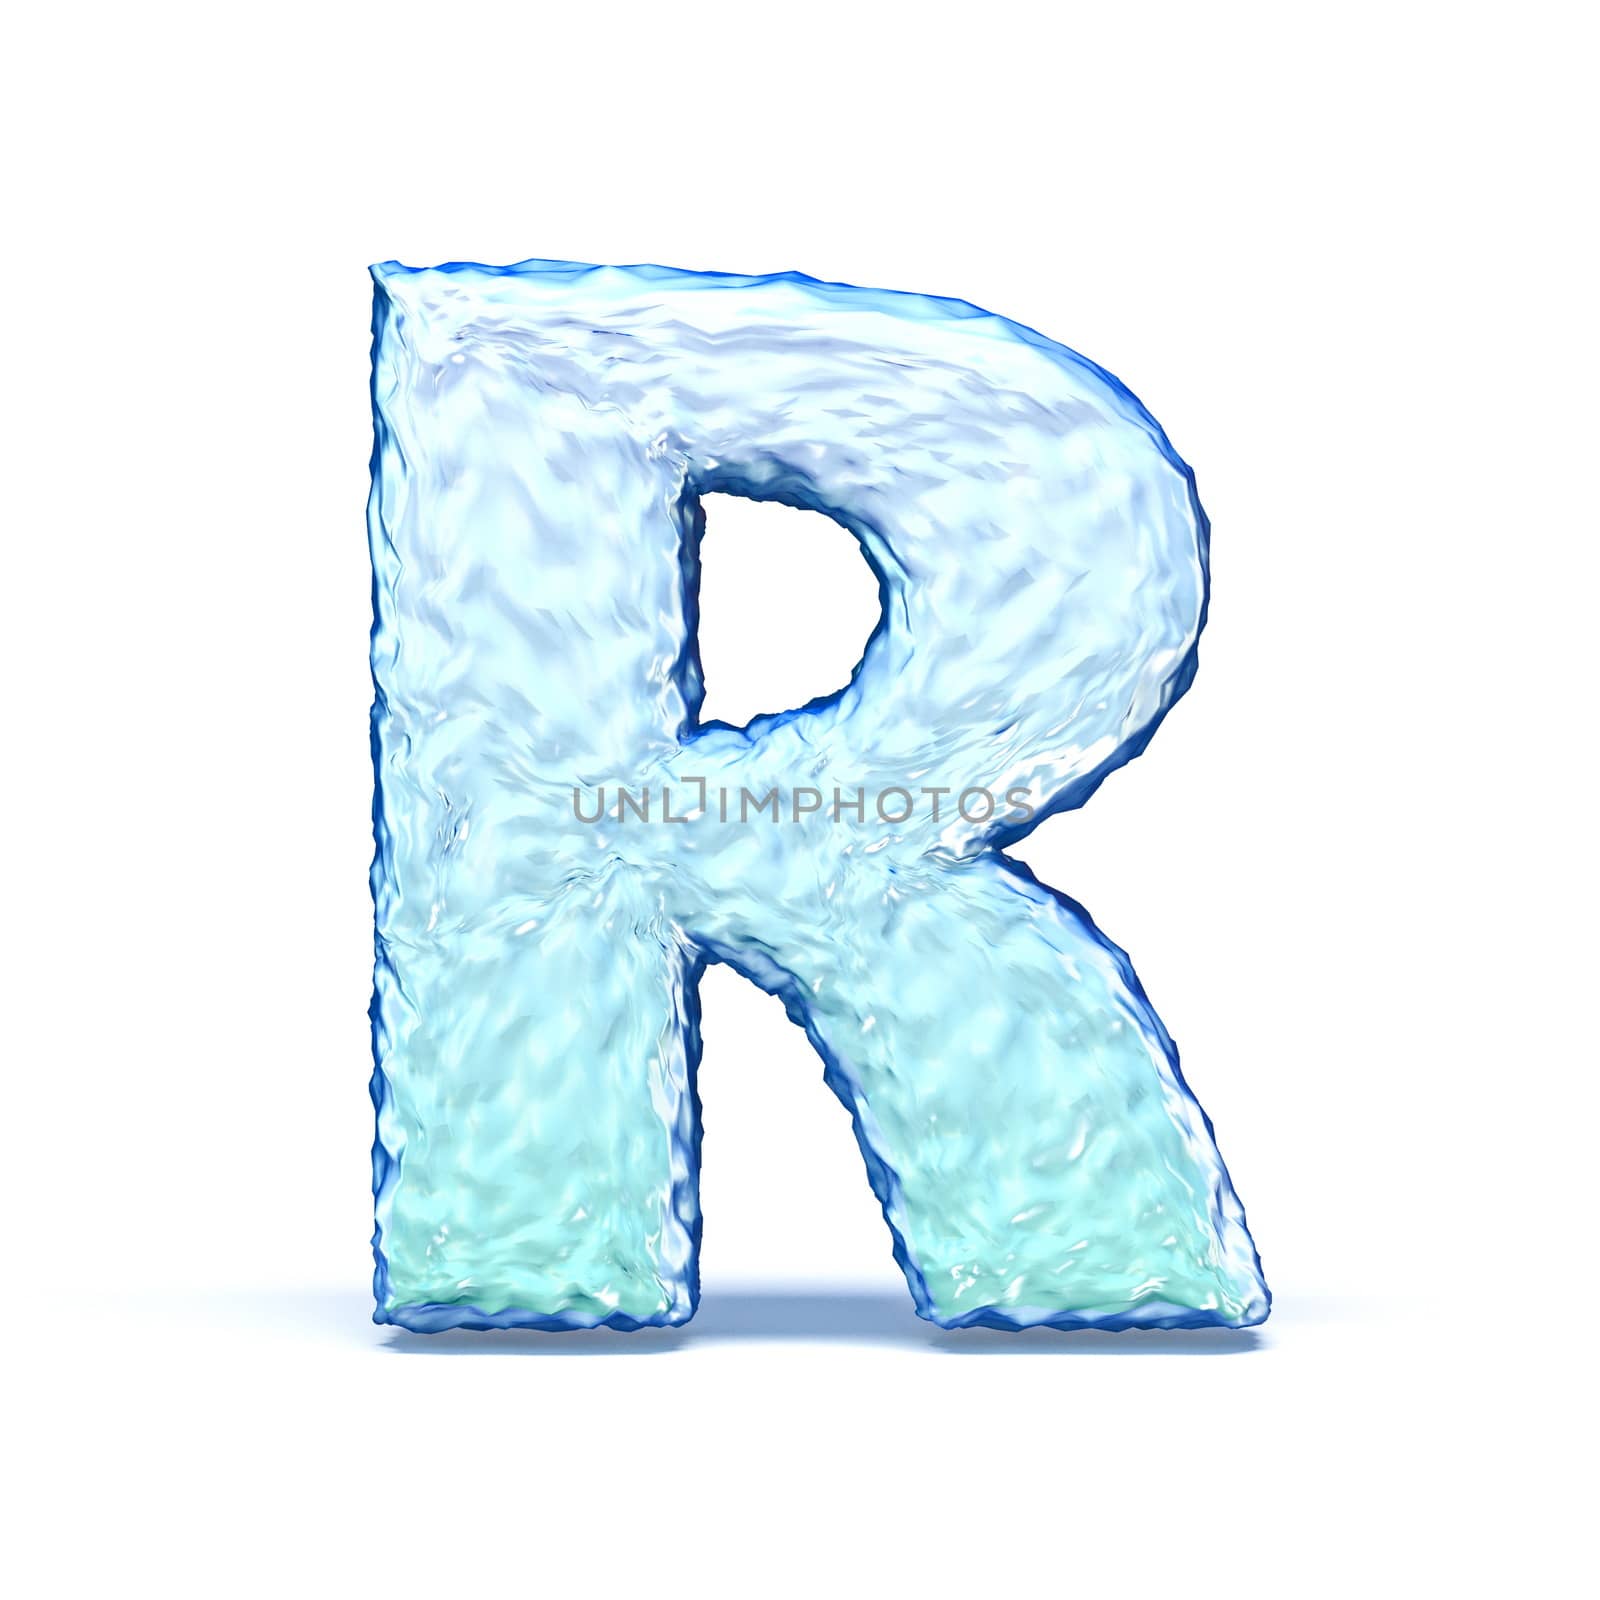 Ice crystal font letter R 3D render illustration isolated on white background